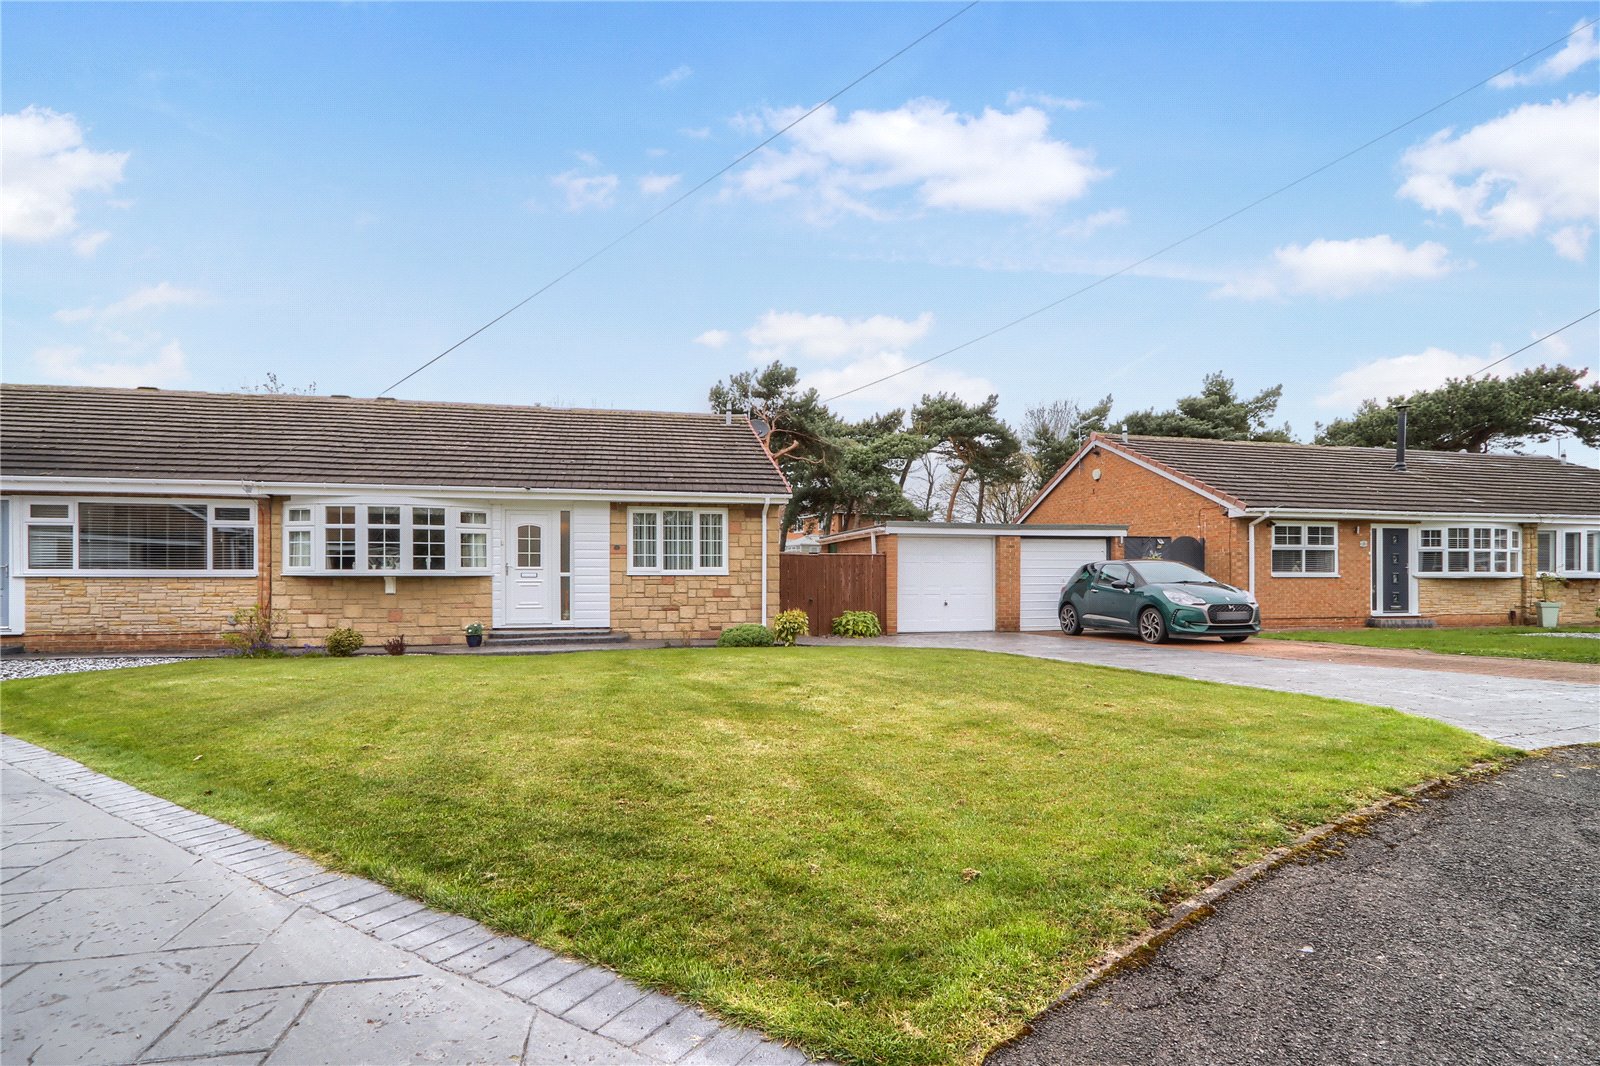 2 bed bungalow for sale in Virginia Close, Stockton-on-Tees  - Property Image 1